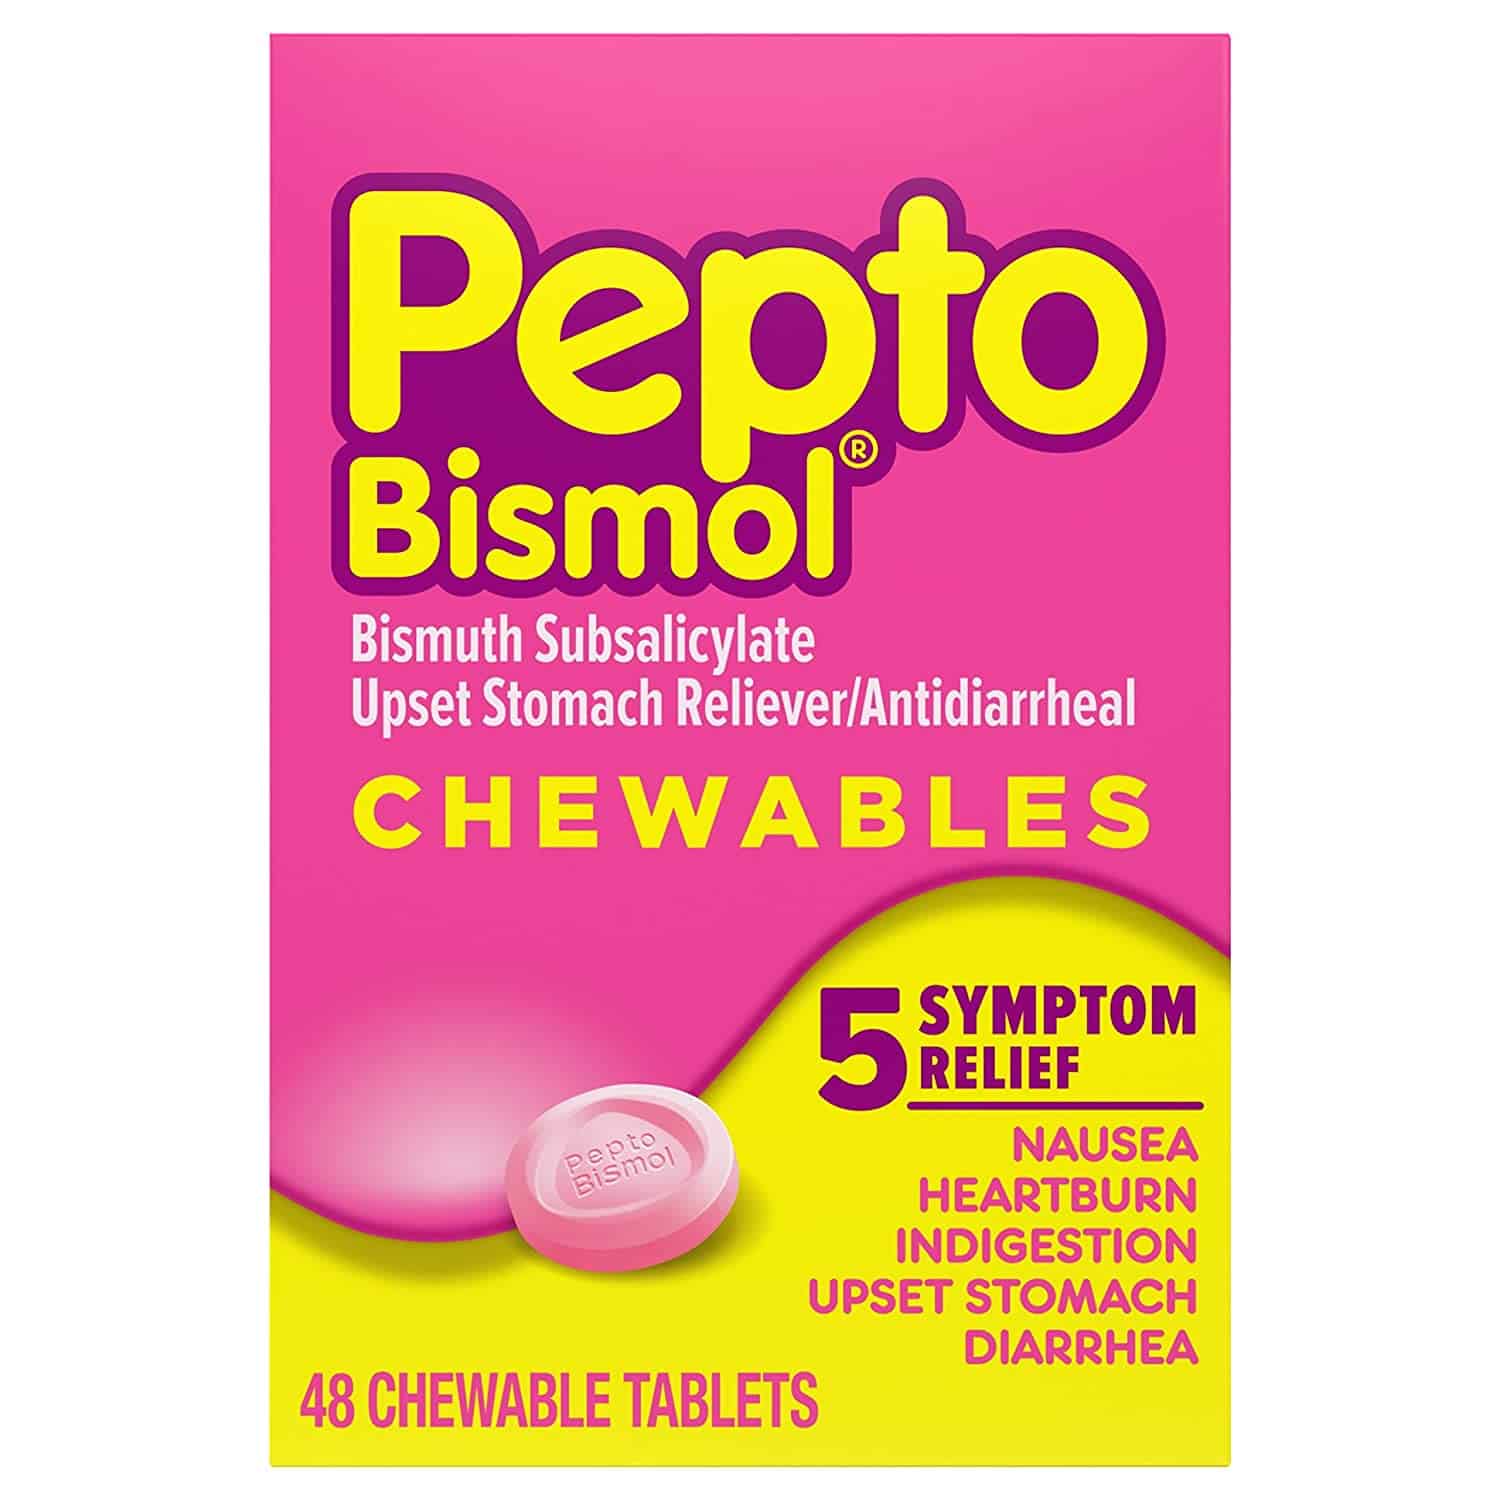 pepto bismol chewables upset stomach relief bismuth subsalicylate multi symptom relief of gas nausea heartburn indigestion upset stomach diarrhea 48 chewable tablets